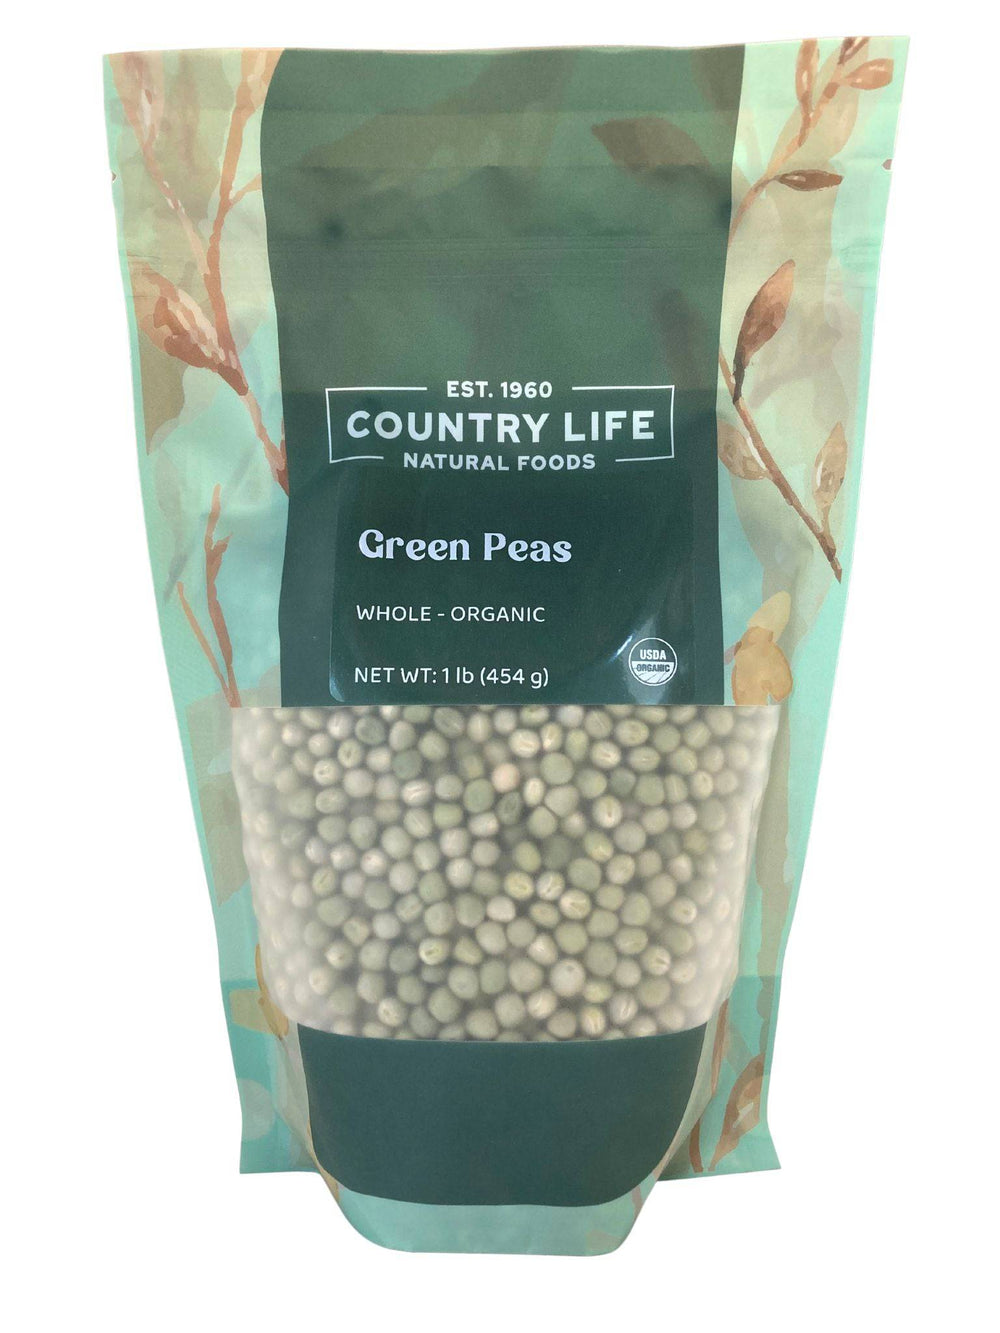 Organic Peas, Green Whole - Country Life Natural Foods